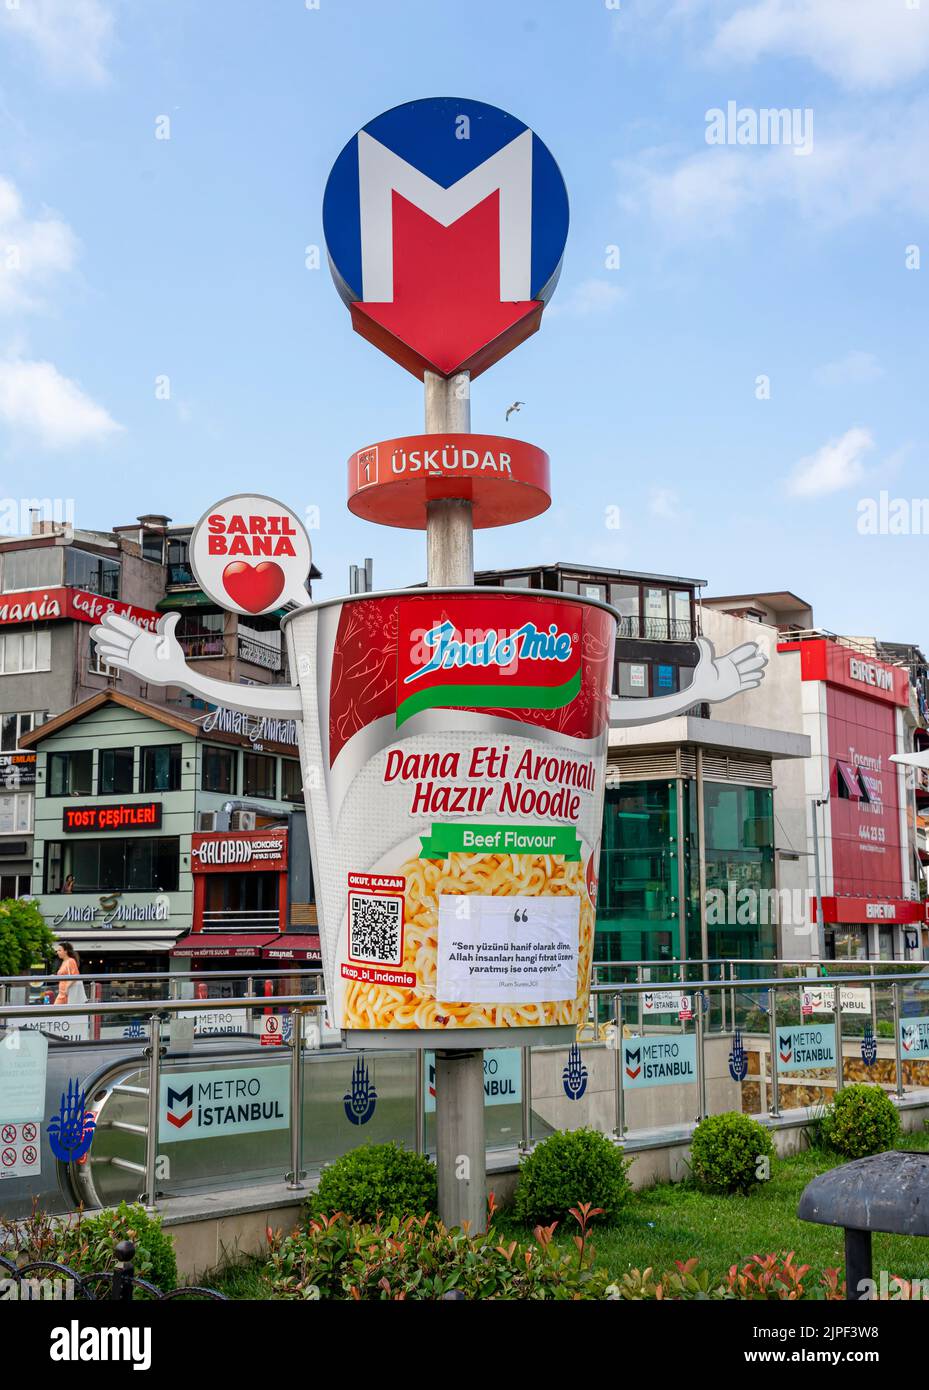 Uskudar metro Station entrance and sign on the pole with Instant noodles pack installation,  Istanbul, Turkey Stock Photo